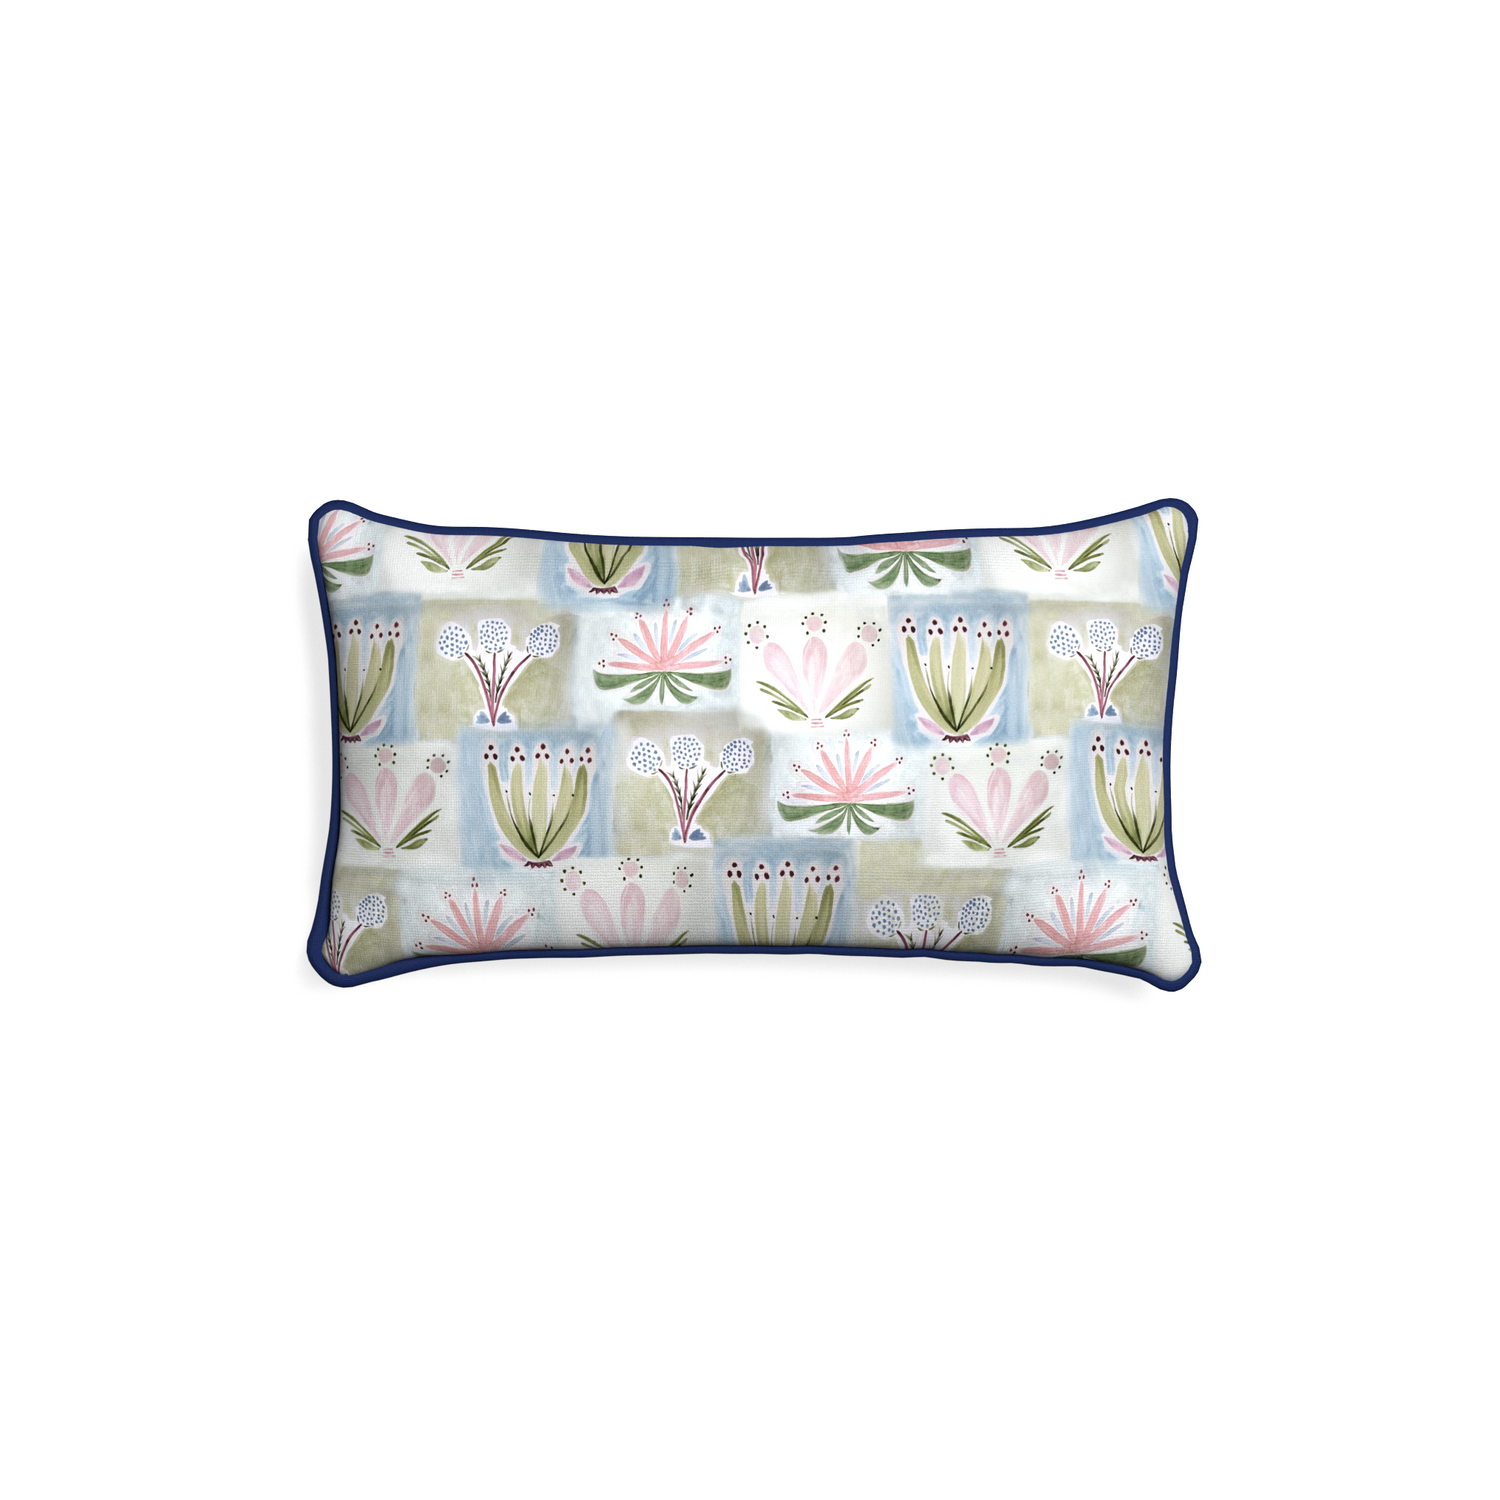 Petite-lumbar harper custom hand-painted floralpillow with midnight piping on white background